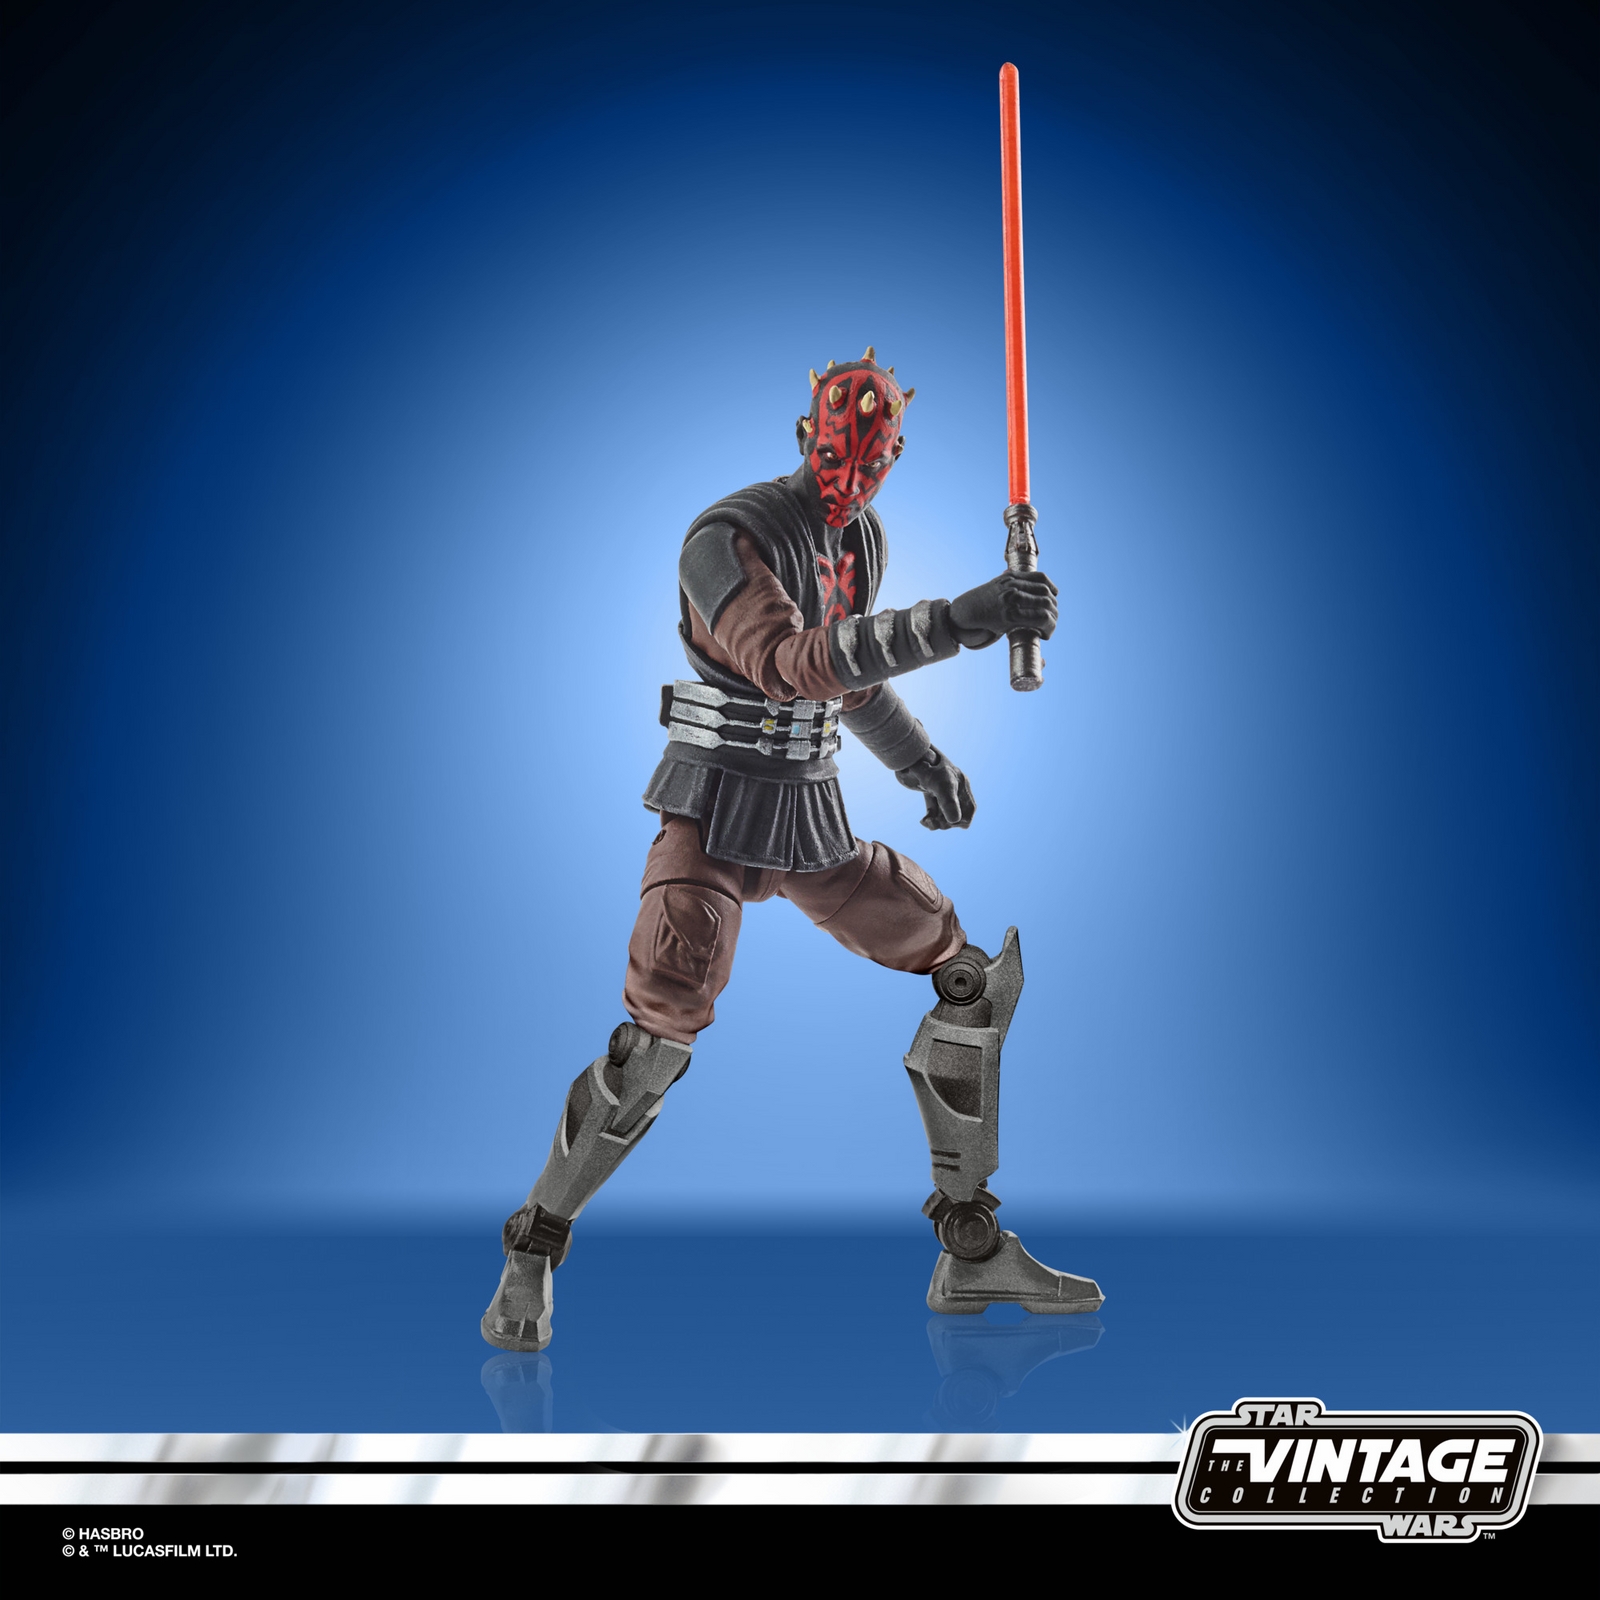 STAR WARS THE VINTAGE COLLECTION 3.75-INCH DARTH MAUL (MANDALORE) Figure - oop (1).jpg